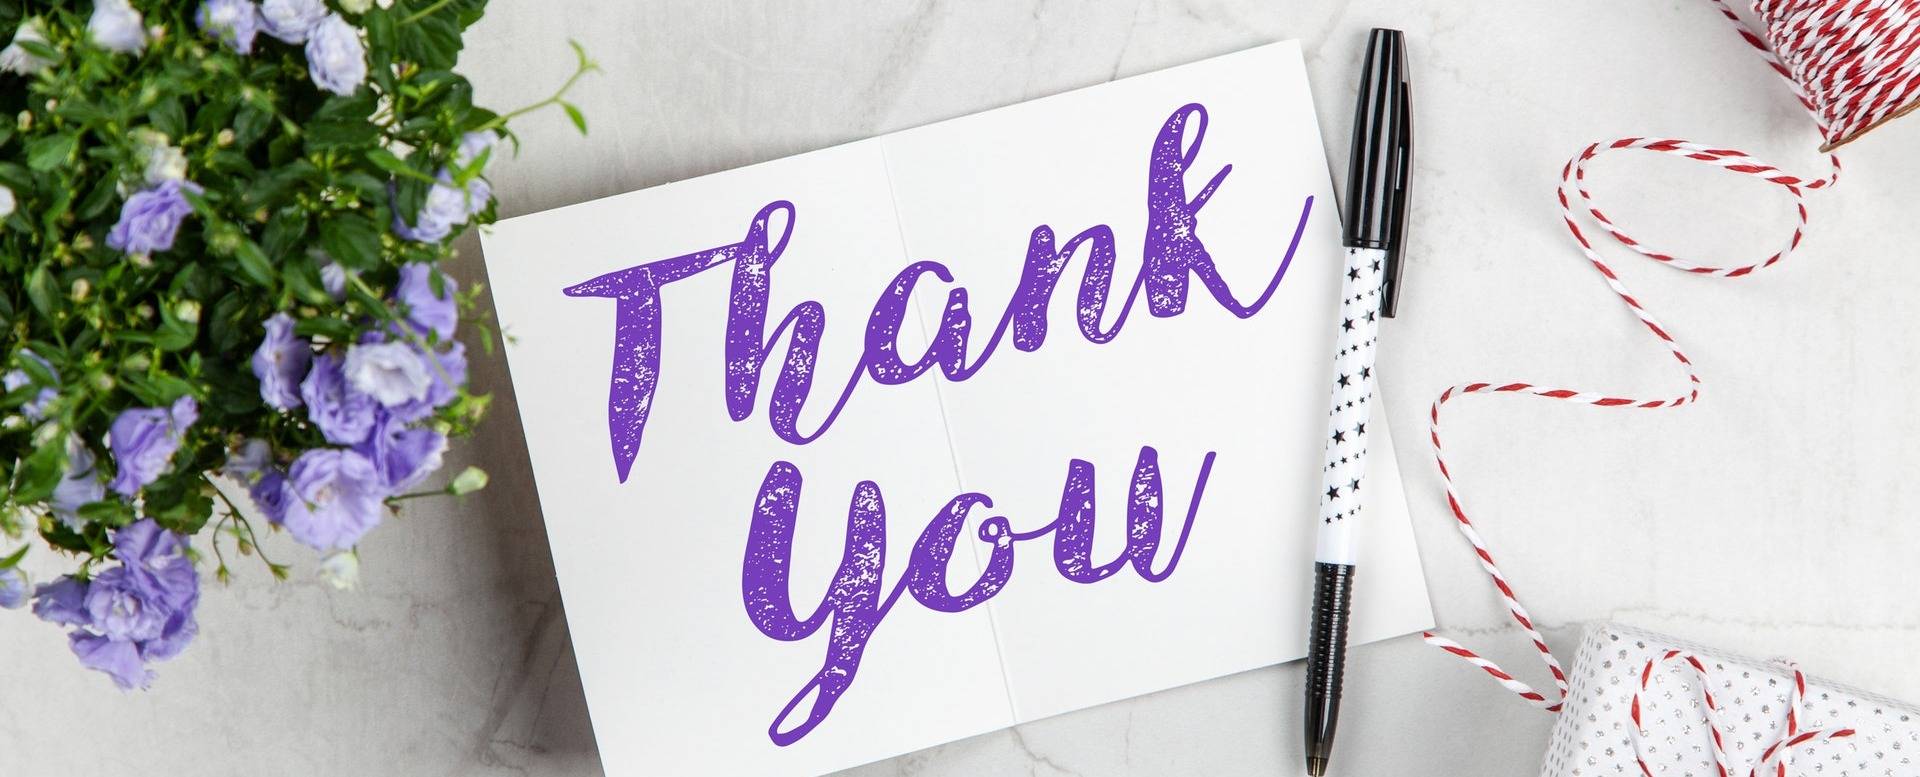 5 Thank You Letter Examples For Extending Gratitude To Your Network Idealist